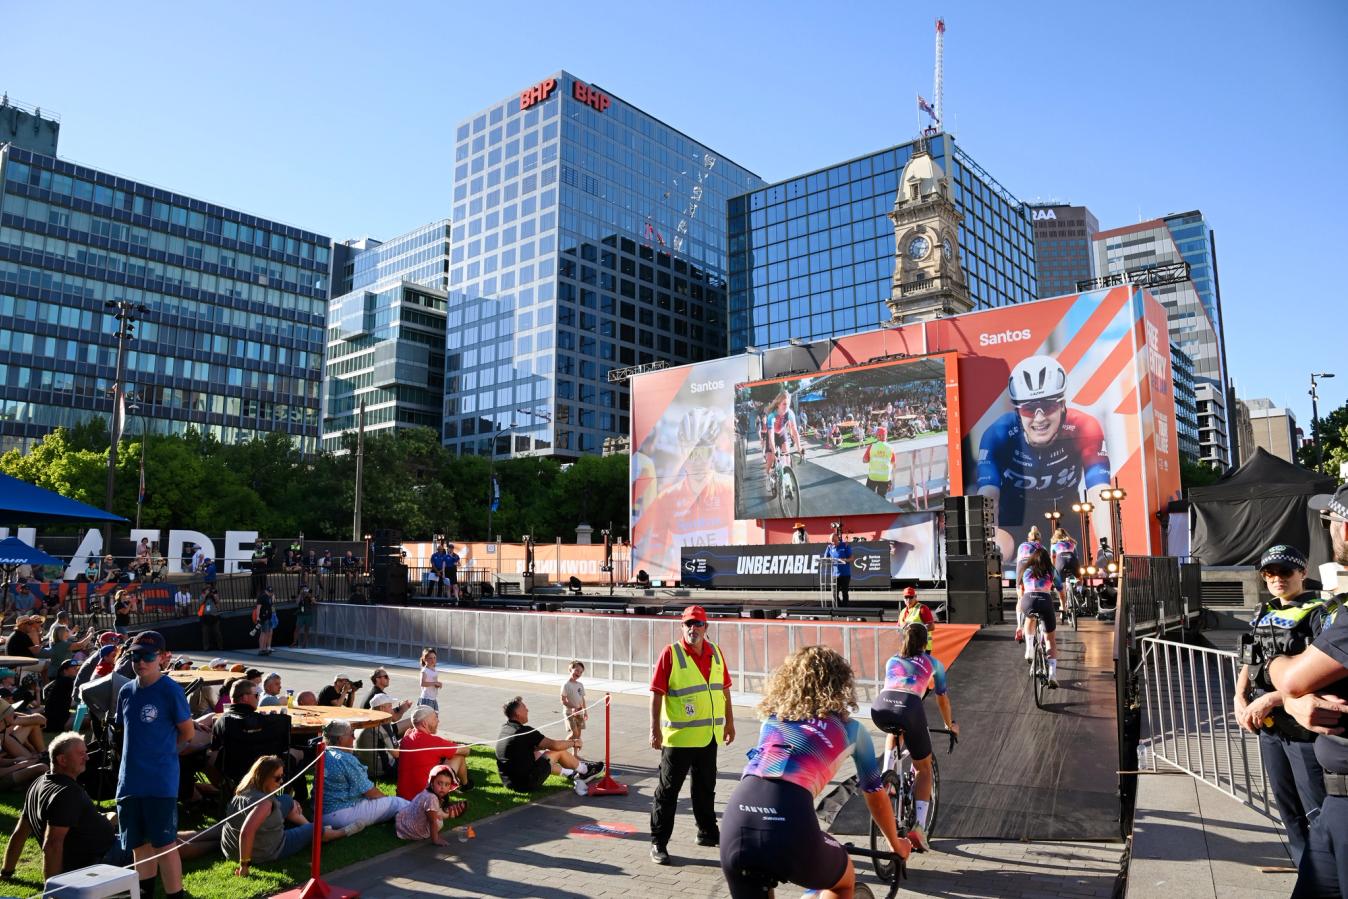 Winning the Zwift Academy will offer incredible opportunities to the lucky riders, as seen by Alex Morrice's participation in the recent Tour Down Under for Canyon-SRAM